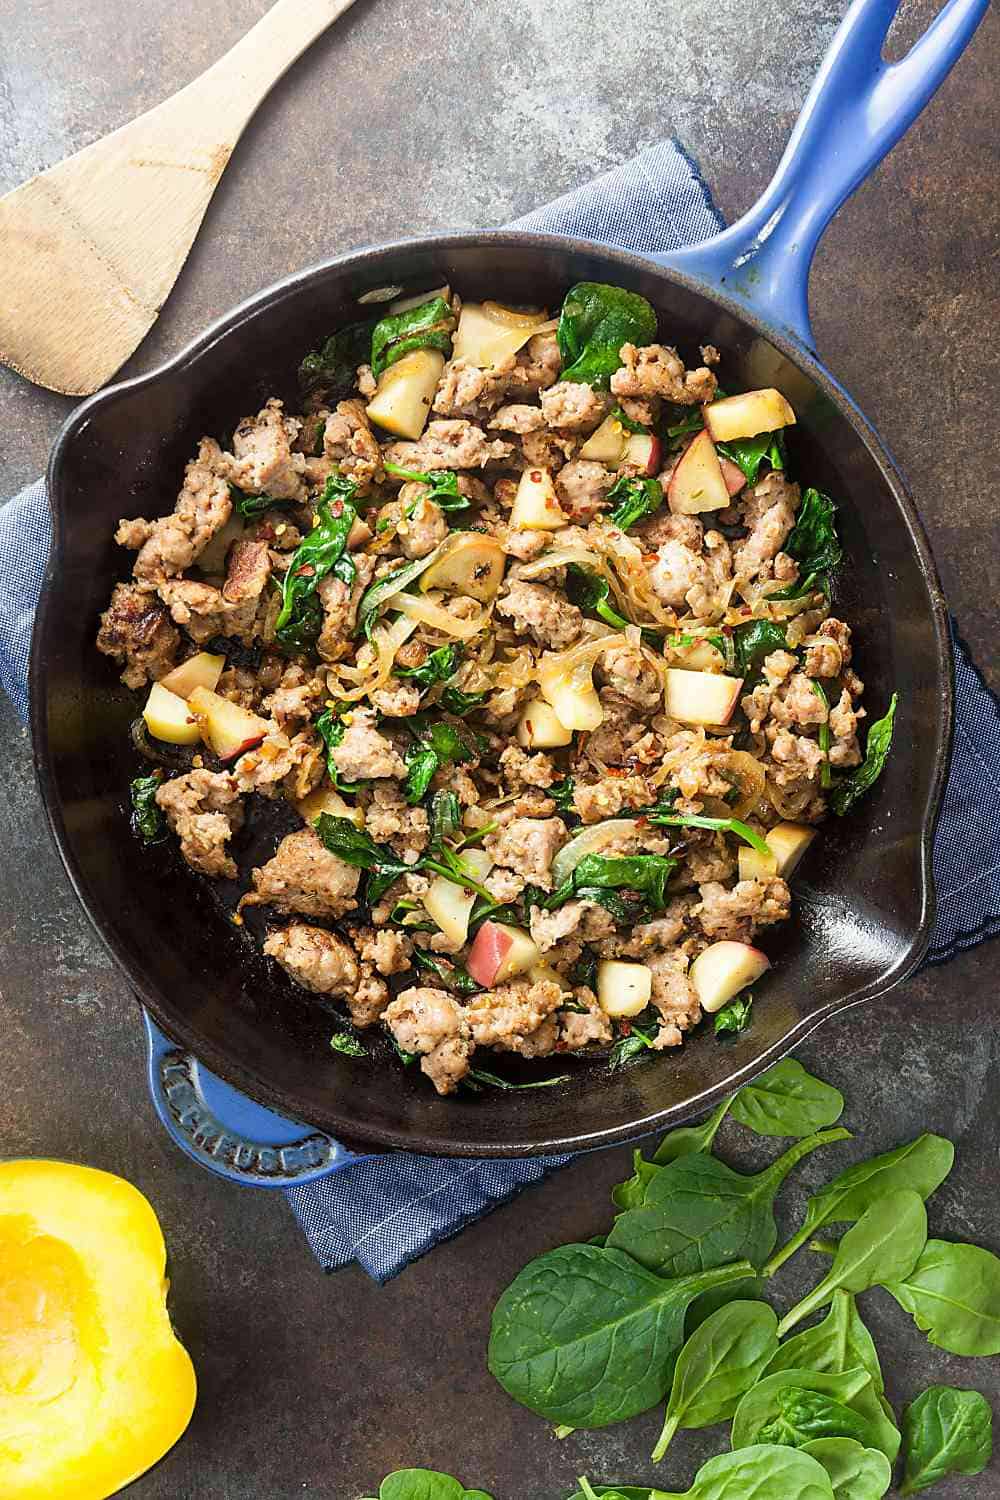 The filling for sausage stuffed acorn squash is made with sausage, spinach, apples, and caramelized onions.